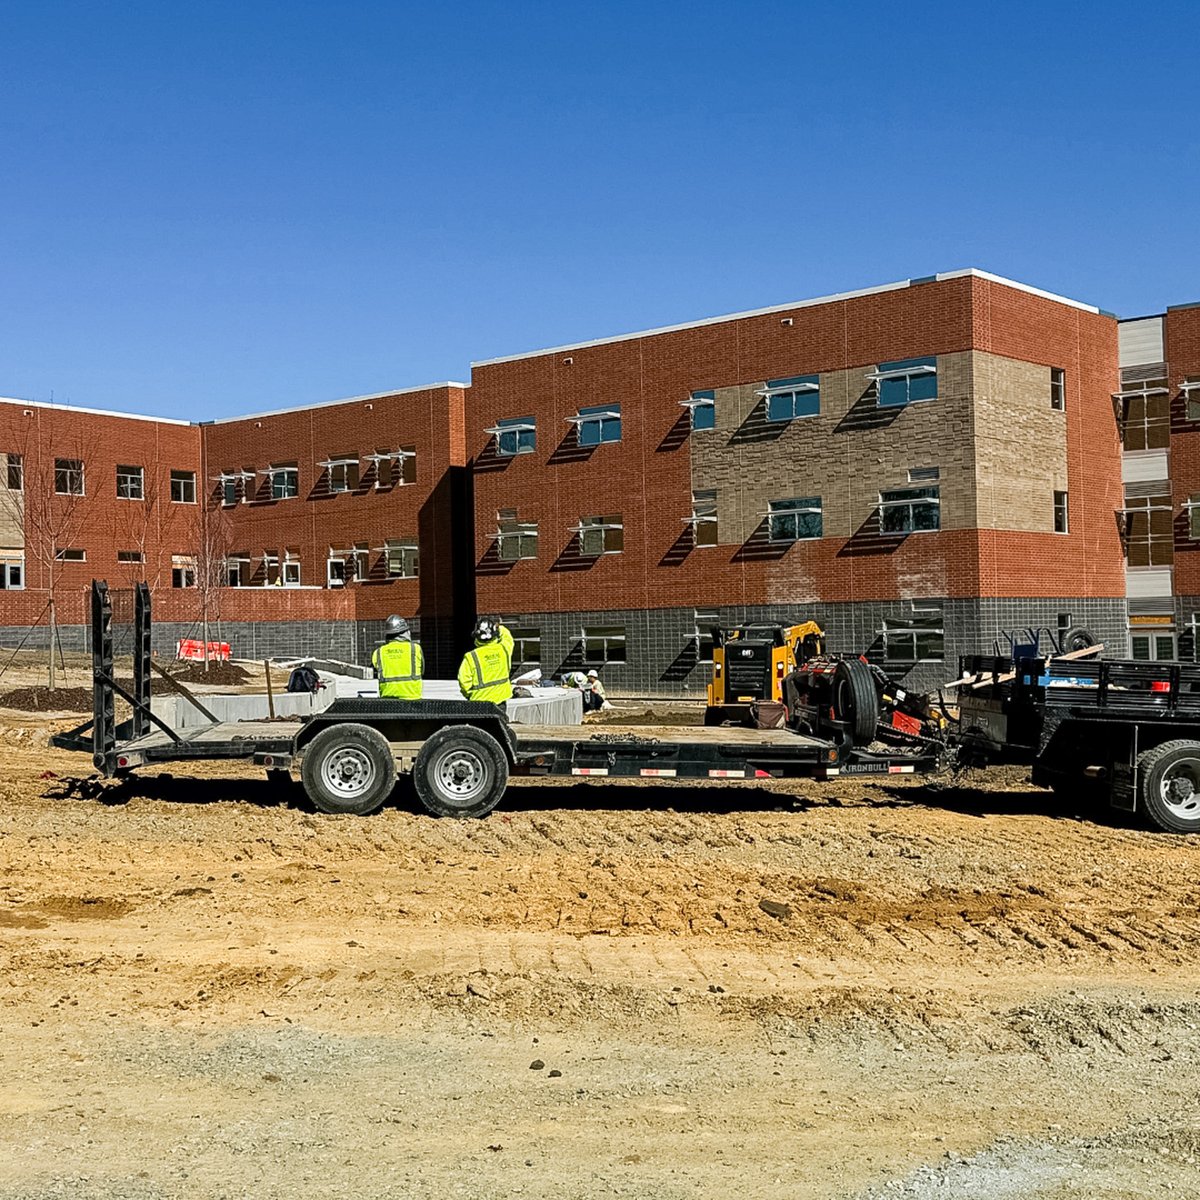 What an awesome day for a field trip at the SMPS Site Tour, exploring the construction progress of the new 260,000-square-foot Fuquay-Varina Middle School, opening this fall! Discover more by clicking below: stewartinc.com #Stewart #BelongAtStewart #SMPS